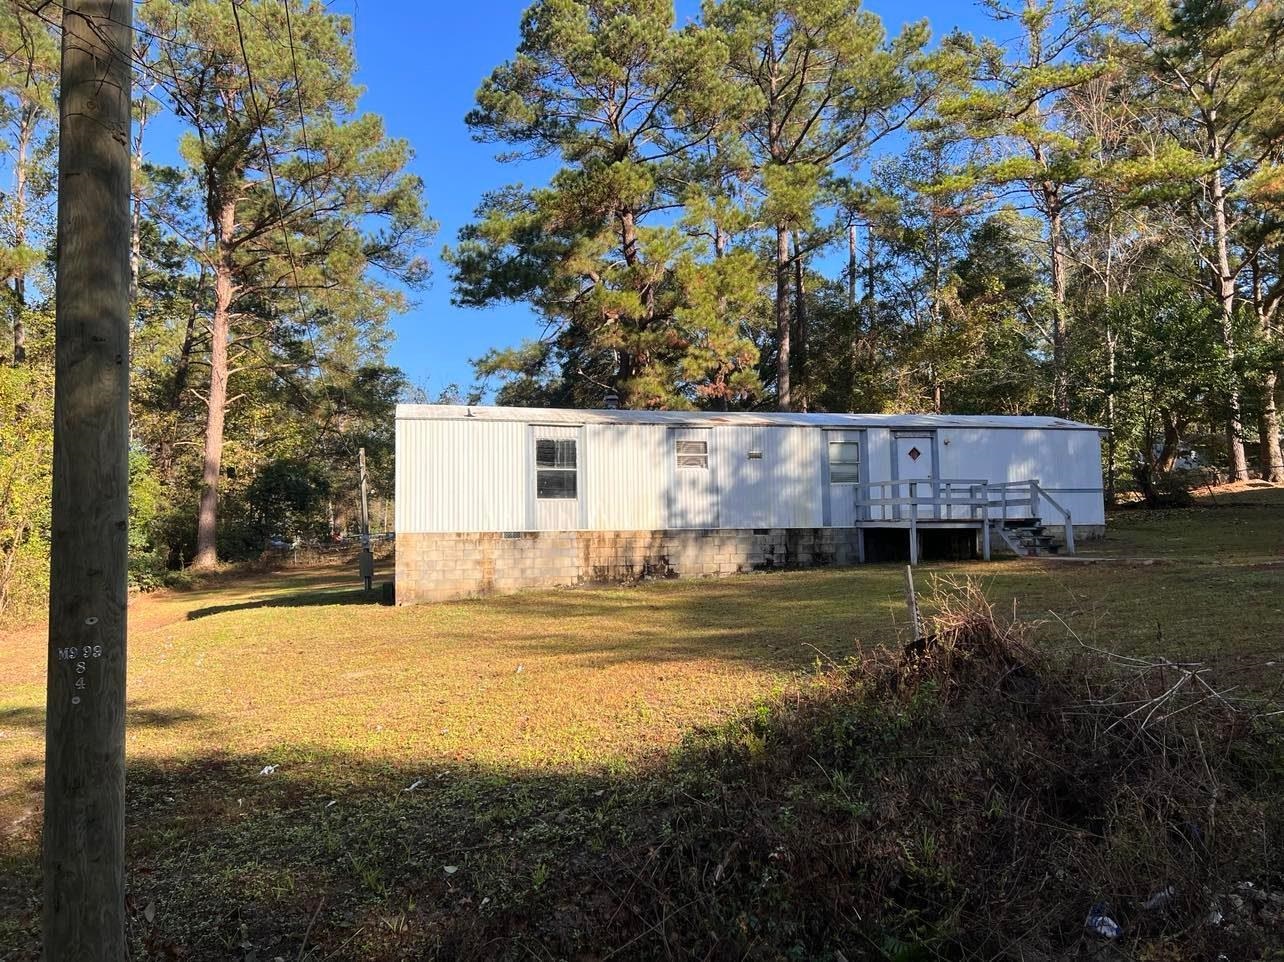 ****Investment Opportunity***** Rental Income***** Estimated rental rate of $650 a month, this 2br, 2ba home is move in ready! Nearly an acre of land on a quiet street.  Recently vacated, home is in good condition, needs some cleanup.  No leaks, 3/4inch plywood flooring, home will be sold "as is" - Seller has maintained this property and collected rent since 2007, has never had a problem renting it out.